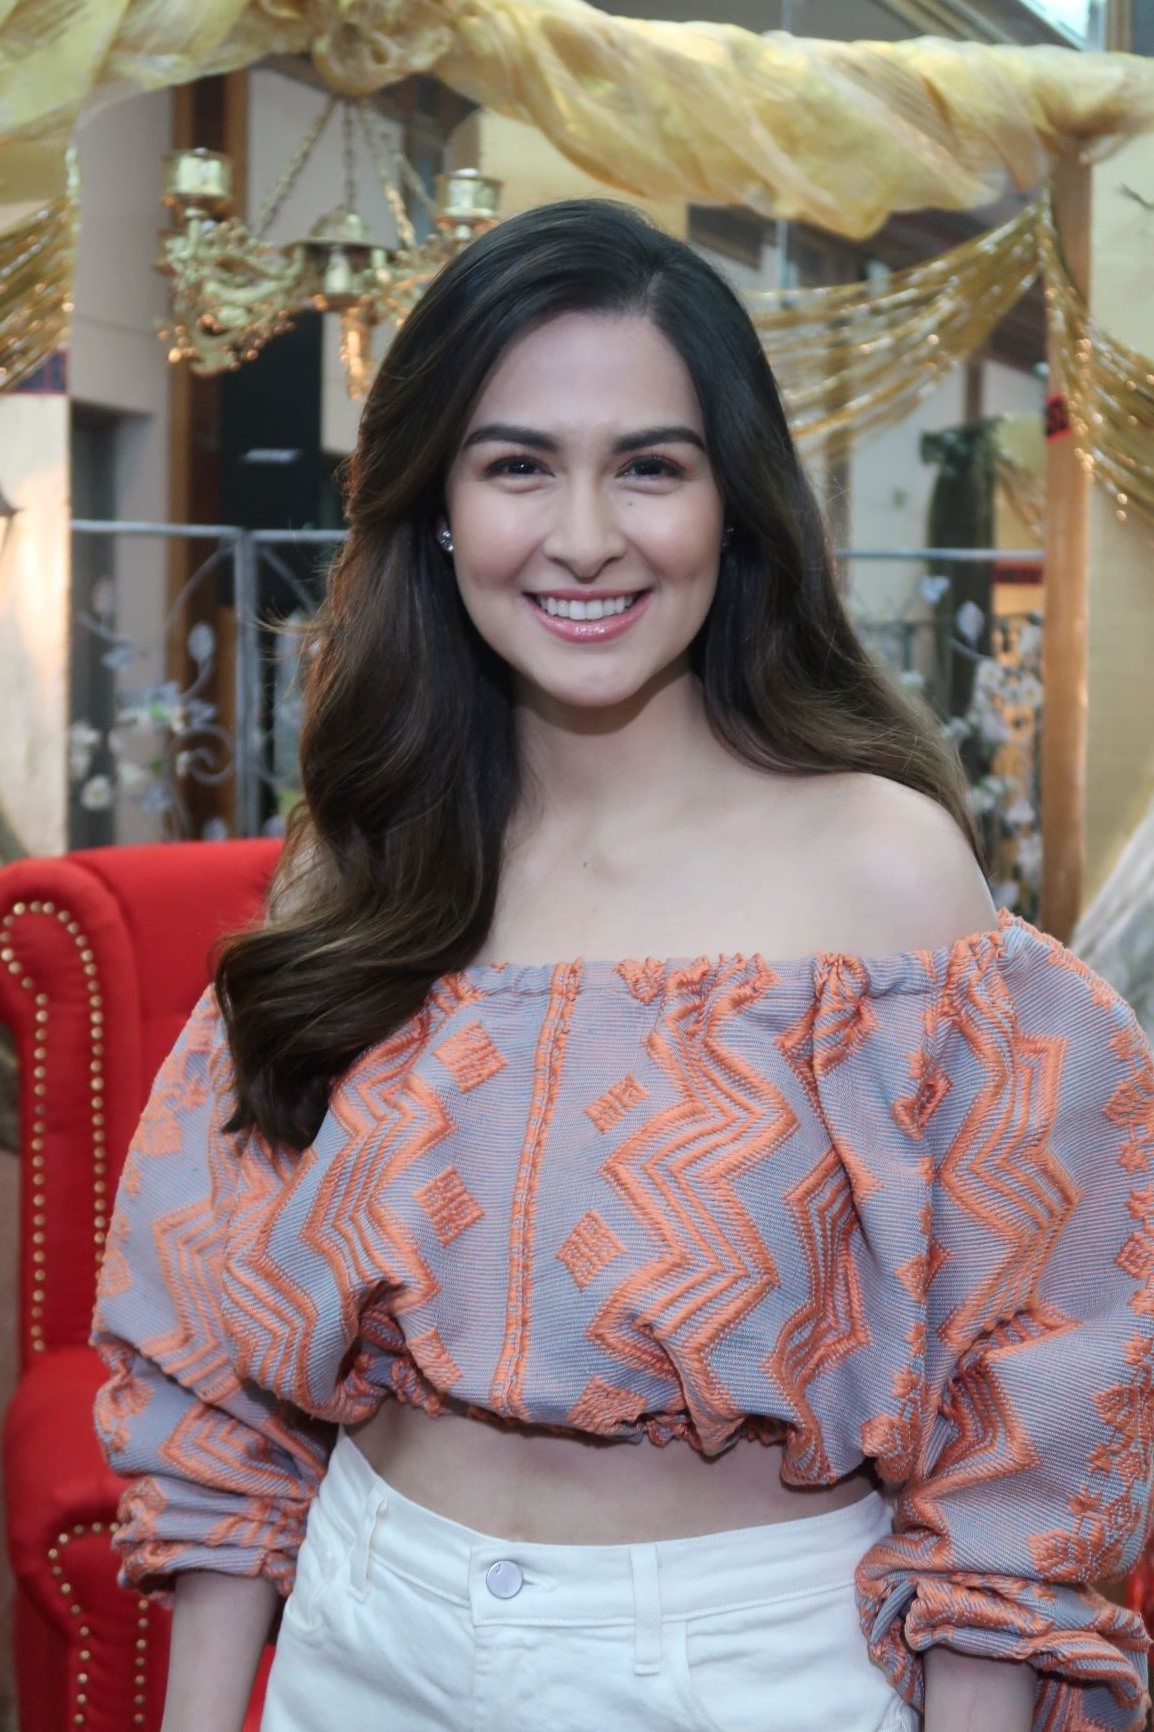 Tadhana, hosted by Marian Rivera, celebrates 2 successful years on air